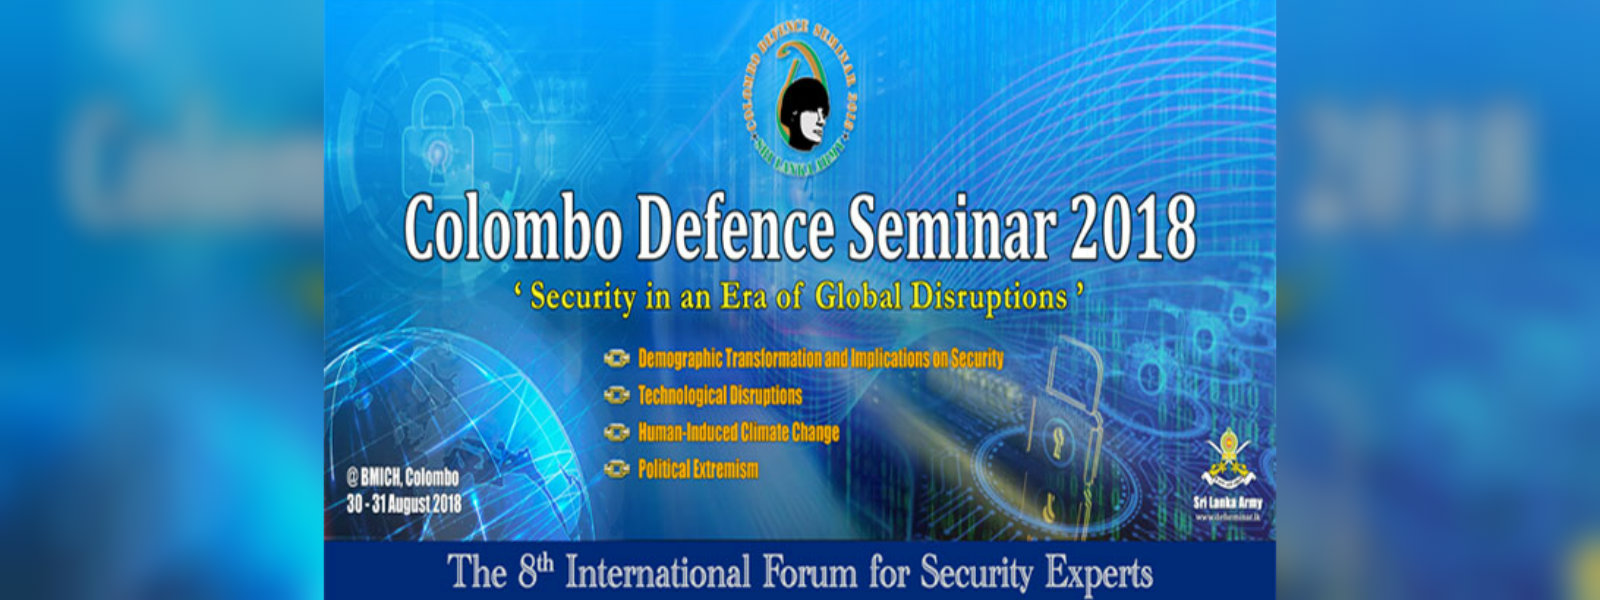 Colombo Defence Seminar commences 